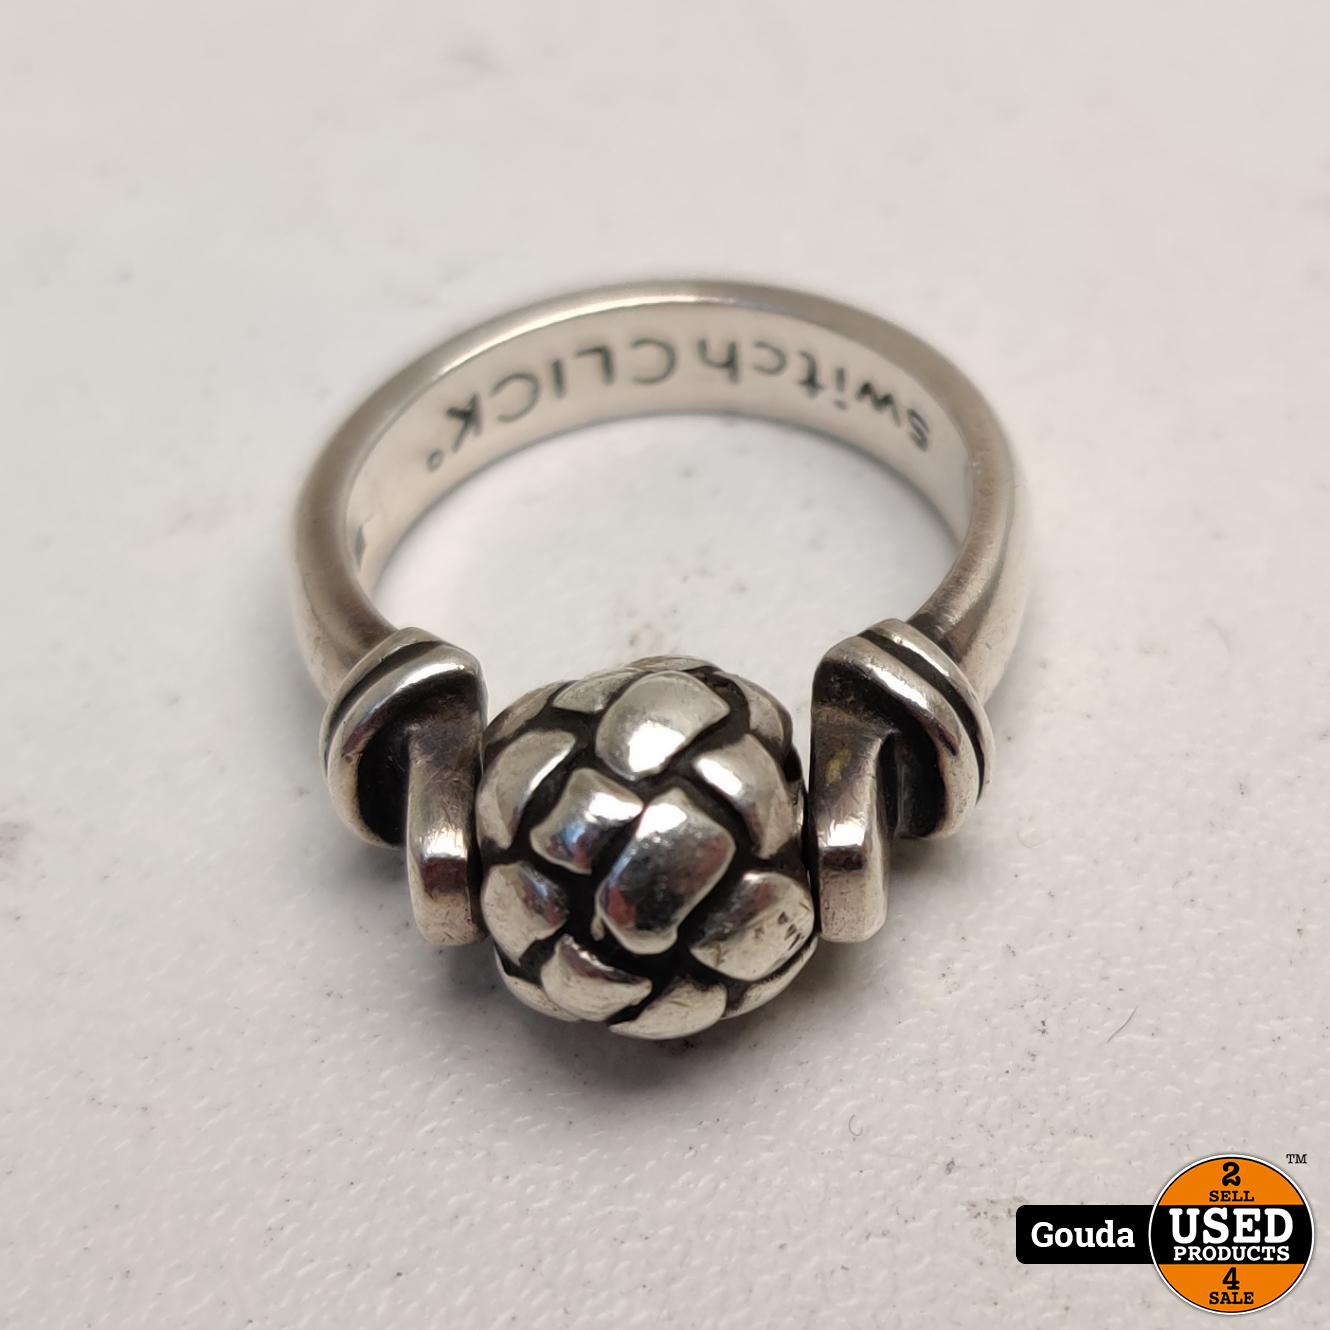 Leerling versnelling Er is behoefte aan Pandora ring 17mm switch click - Used Products Gouda